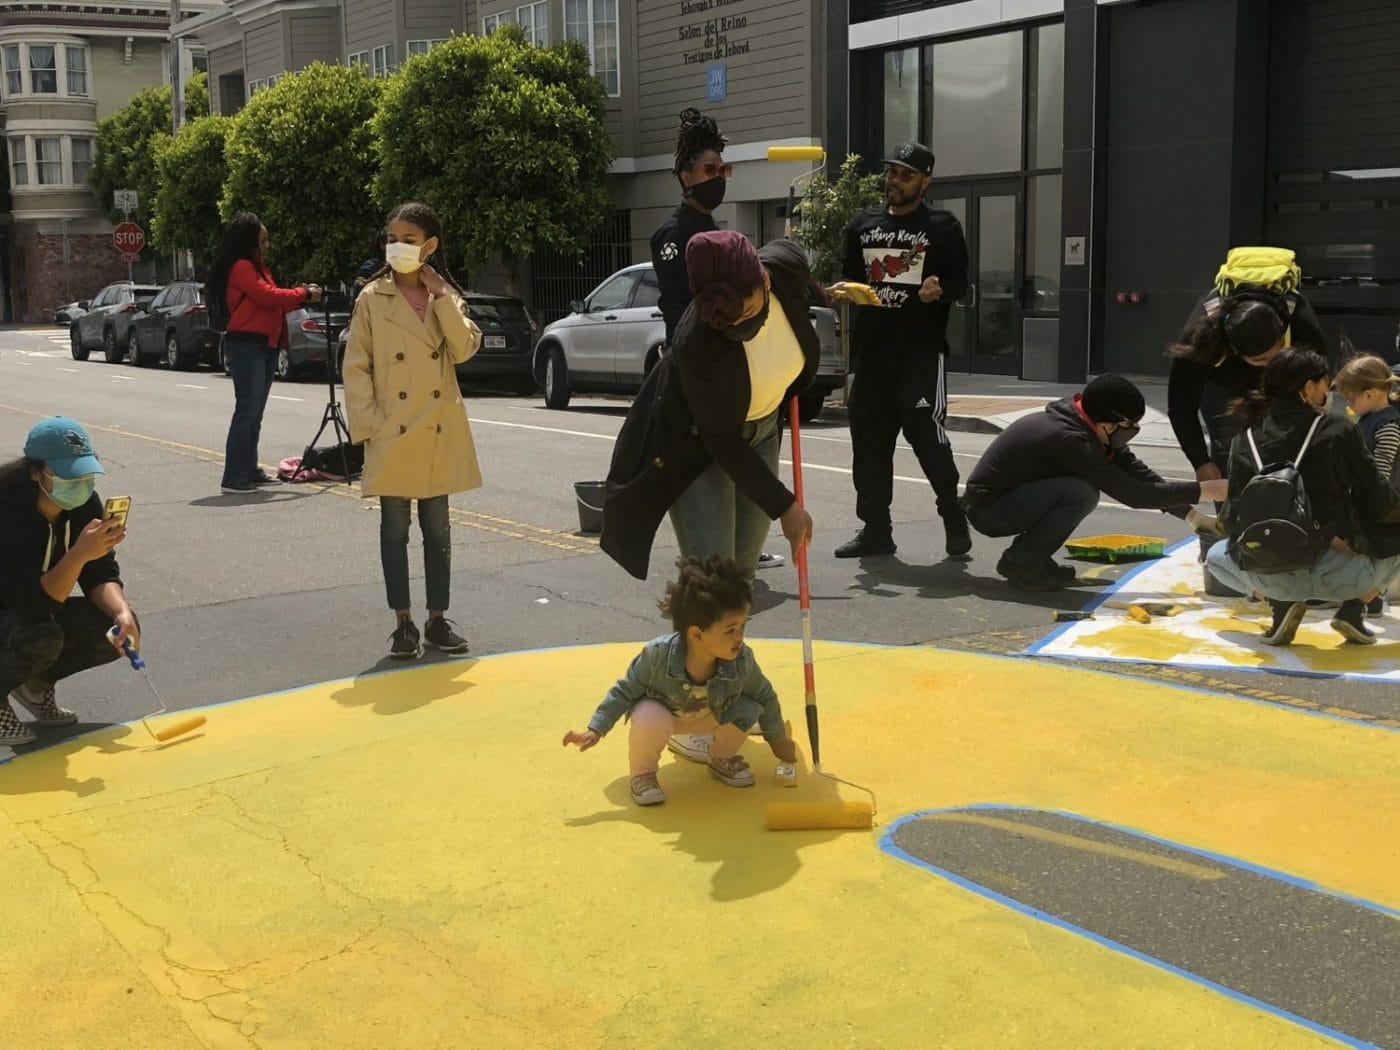 Melonie-Melorra-Green-Project-Level-lead-‘Black-Lives-Matter’-700-block-Fulton-street-painting-061220-4-by-Meaghan-Mitchell-Hoodline-1400x1050, 100+ volunteers paint ‘Black Lives Matter’ in center of San Francisco street, Local News & Views 